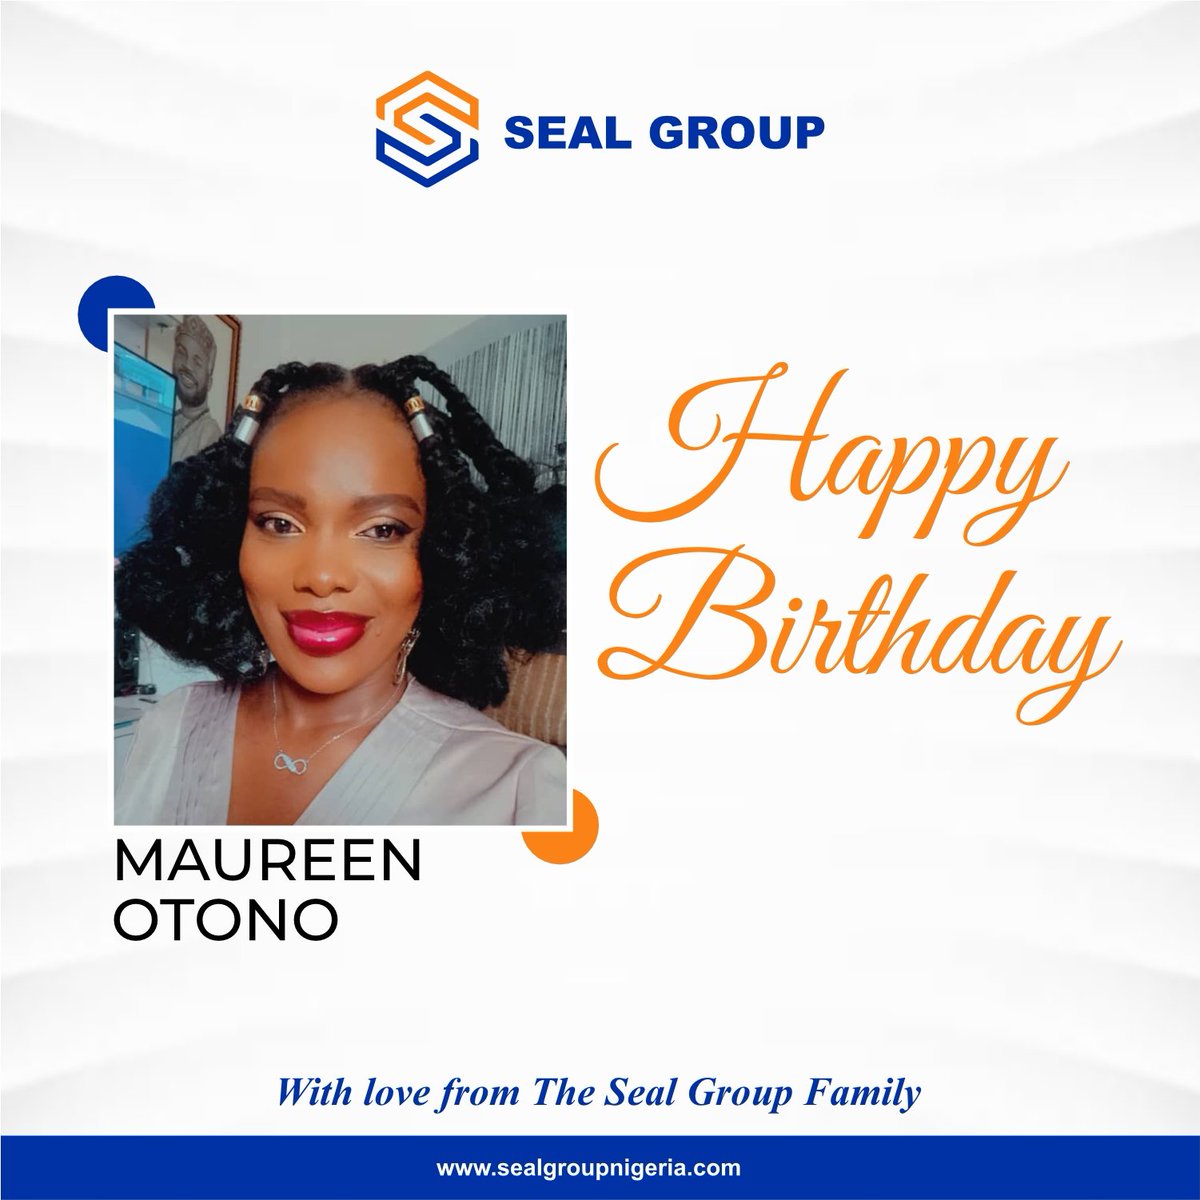 Happy Birthday Maureen Otono
May God perfect all that concerns you
--------
To speak with our representative, send a DM or Whatsapp 08158848484
09022228280
Info@qps.ng
qps.ng
.
.
#smallbusinesses #promotionalproducts #printingservices  #promotionalproducts